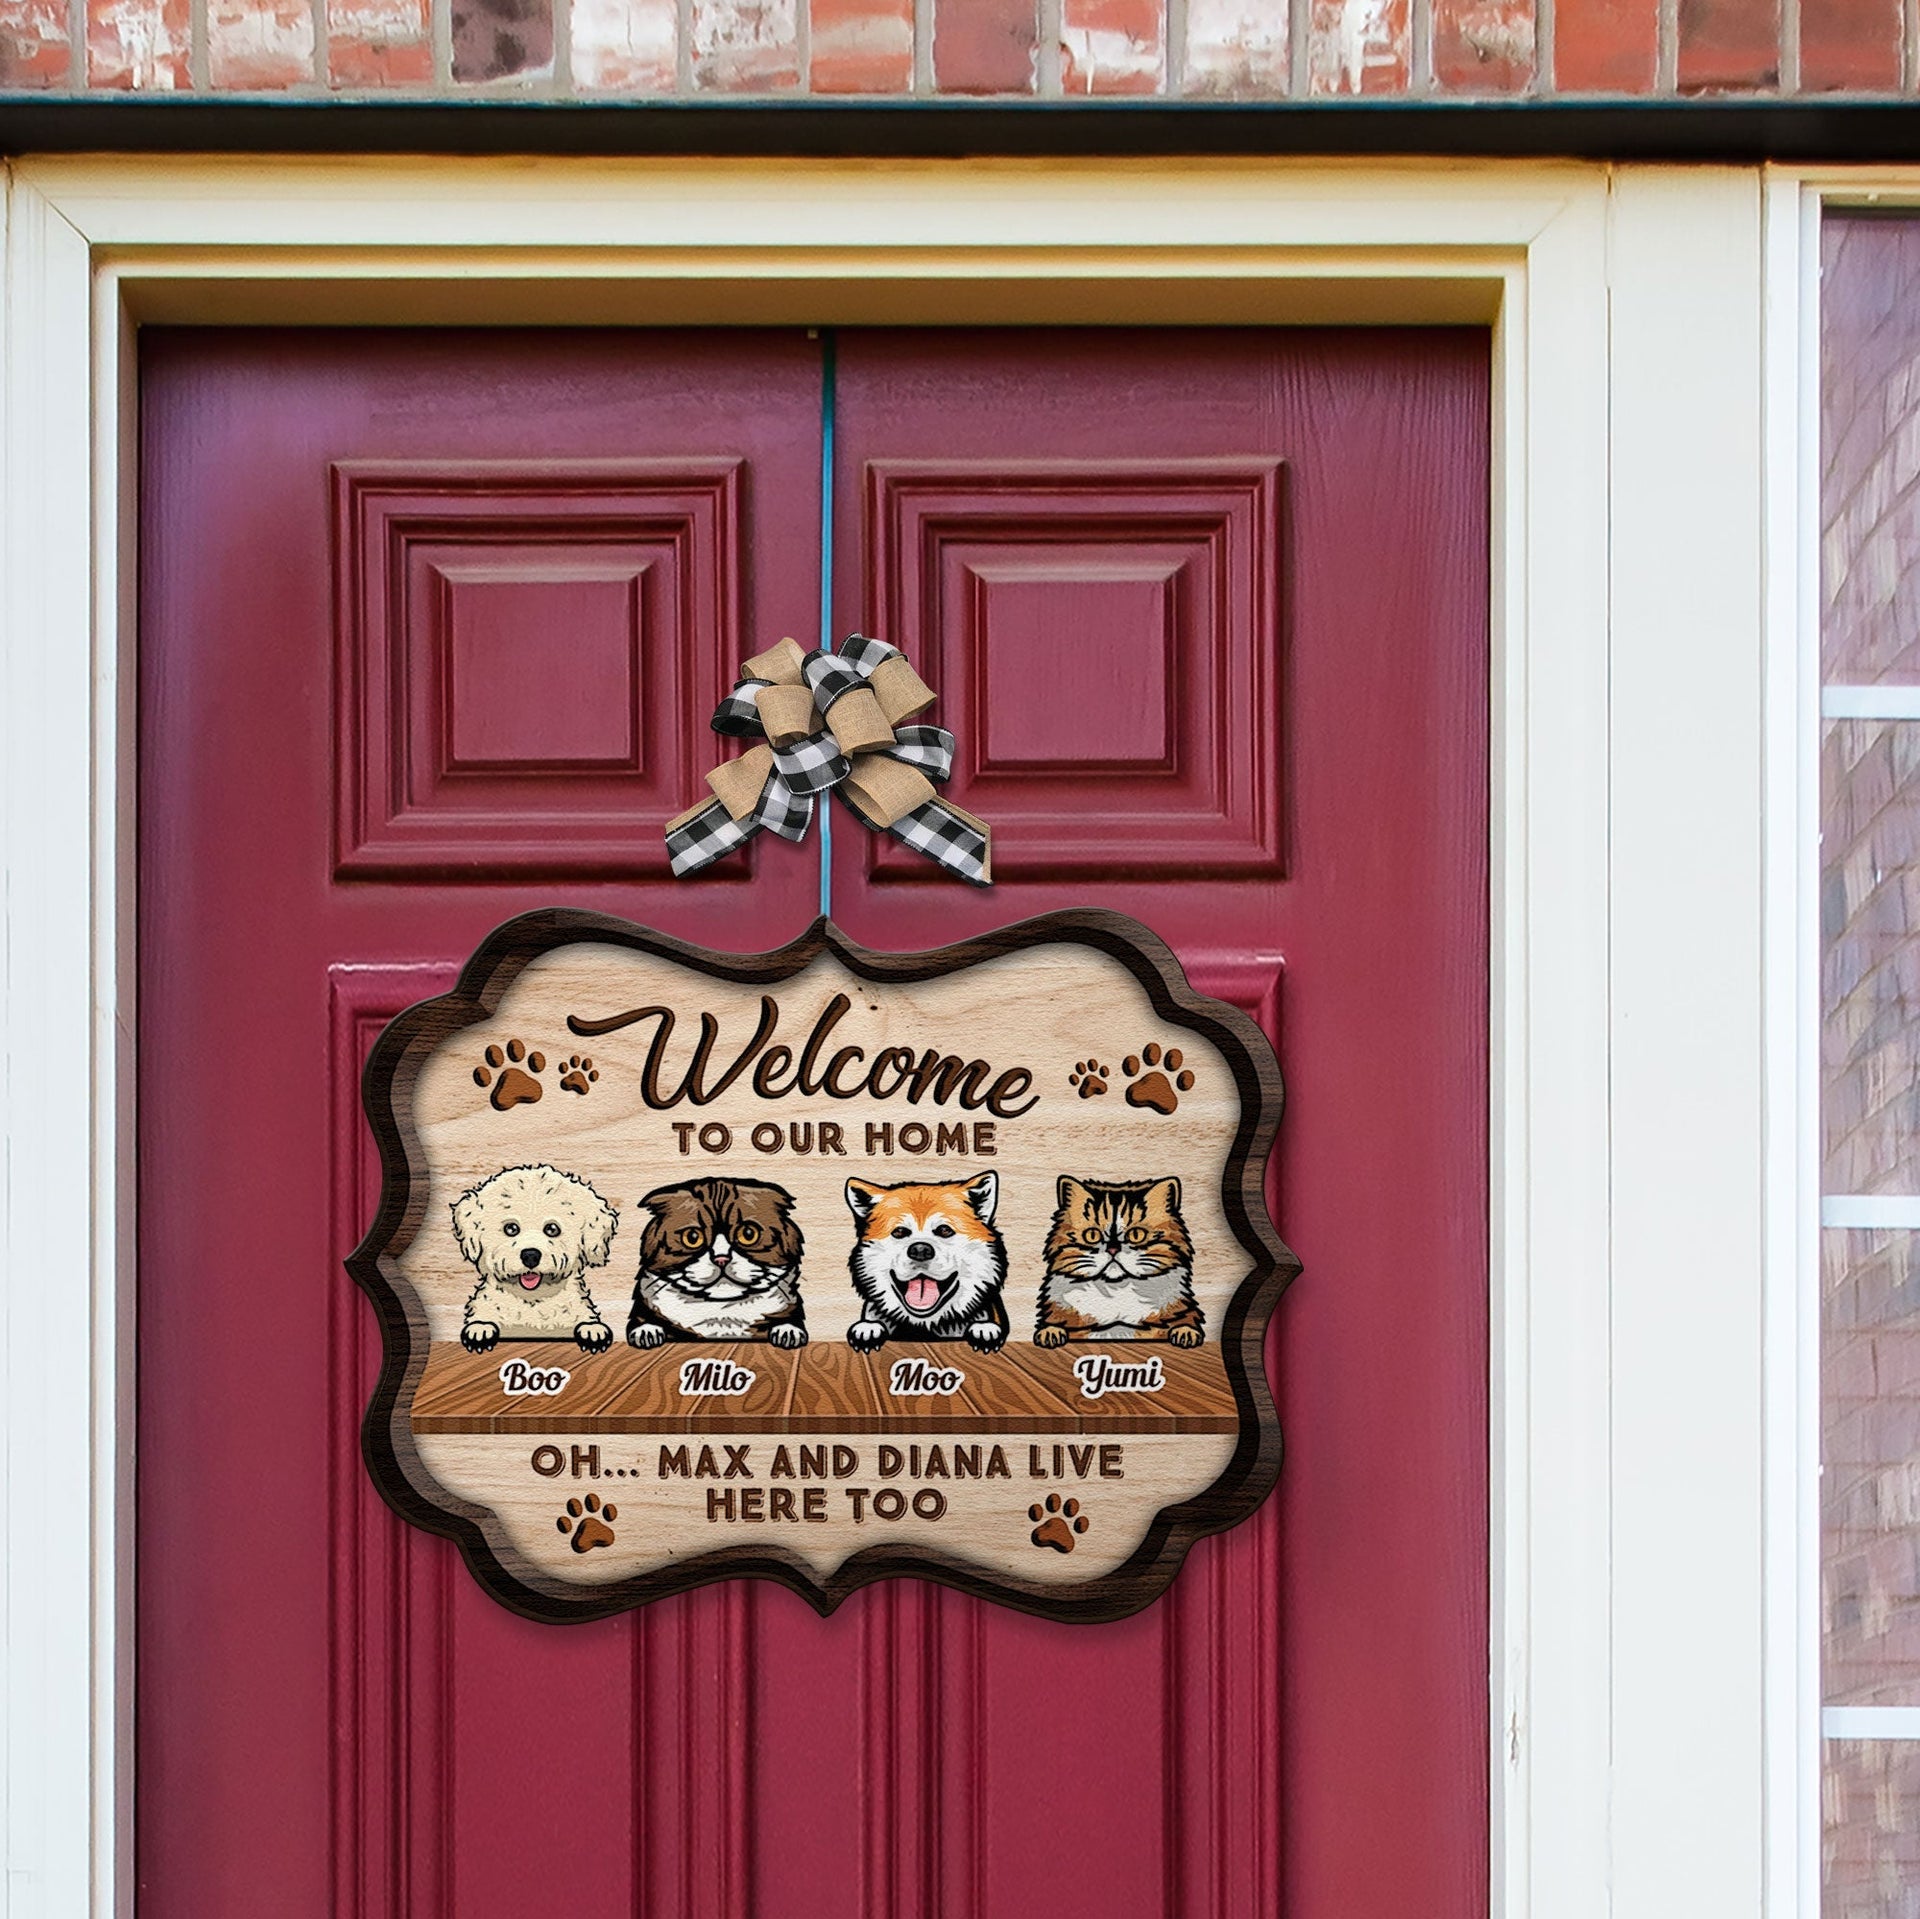 Welcome To Our Home  - Personalized Custom Shaped Wood Sign - Funny, Birthday, Home Decor Gift For Family, Pet Lovers, Pet Owners